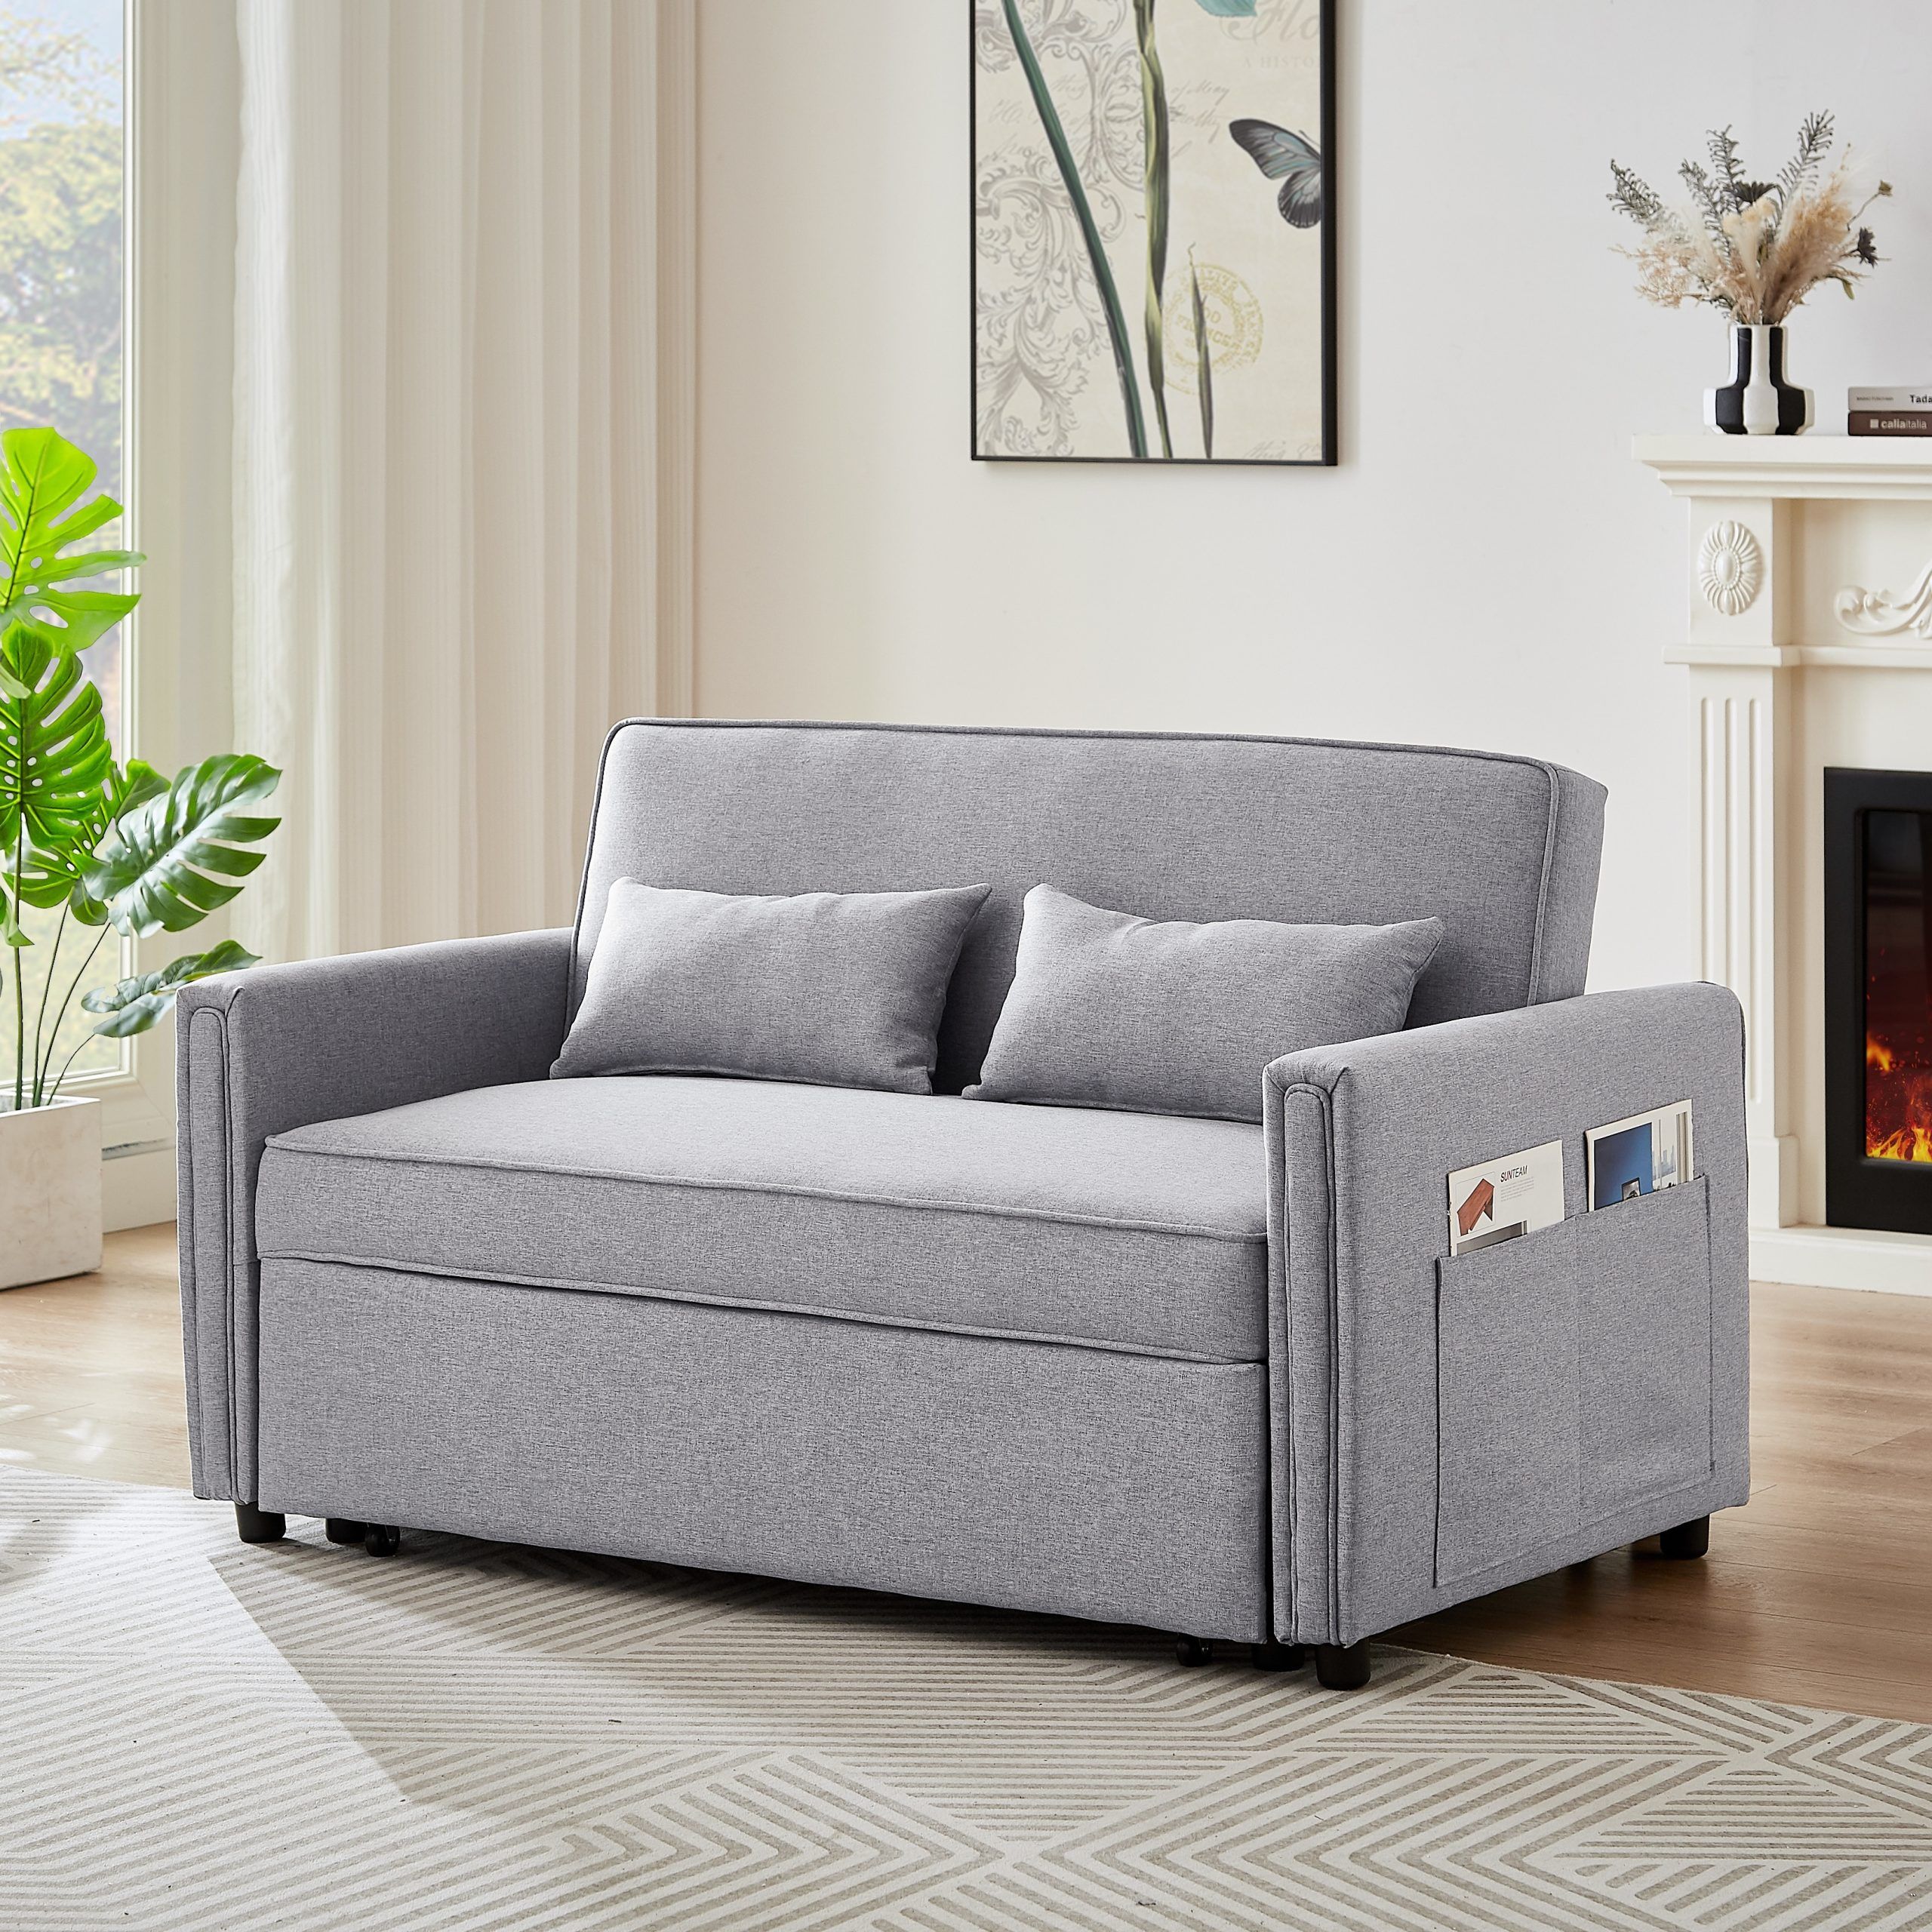 Modern Linen Convertible Loveseat Sleeper Sofa Couch With Adjustable  Backrest, Pull Out Bed And 2 Lumbar Pillows, Grey – On Sale – Bed Bath &  Beyond – 38373427 Regarding Convertible Gray Loveseat Sleepers (View 3 of 15)